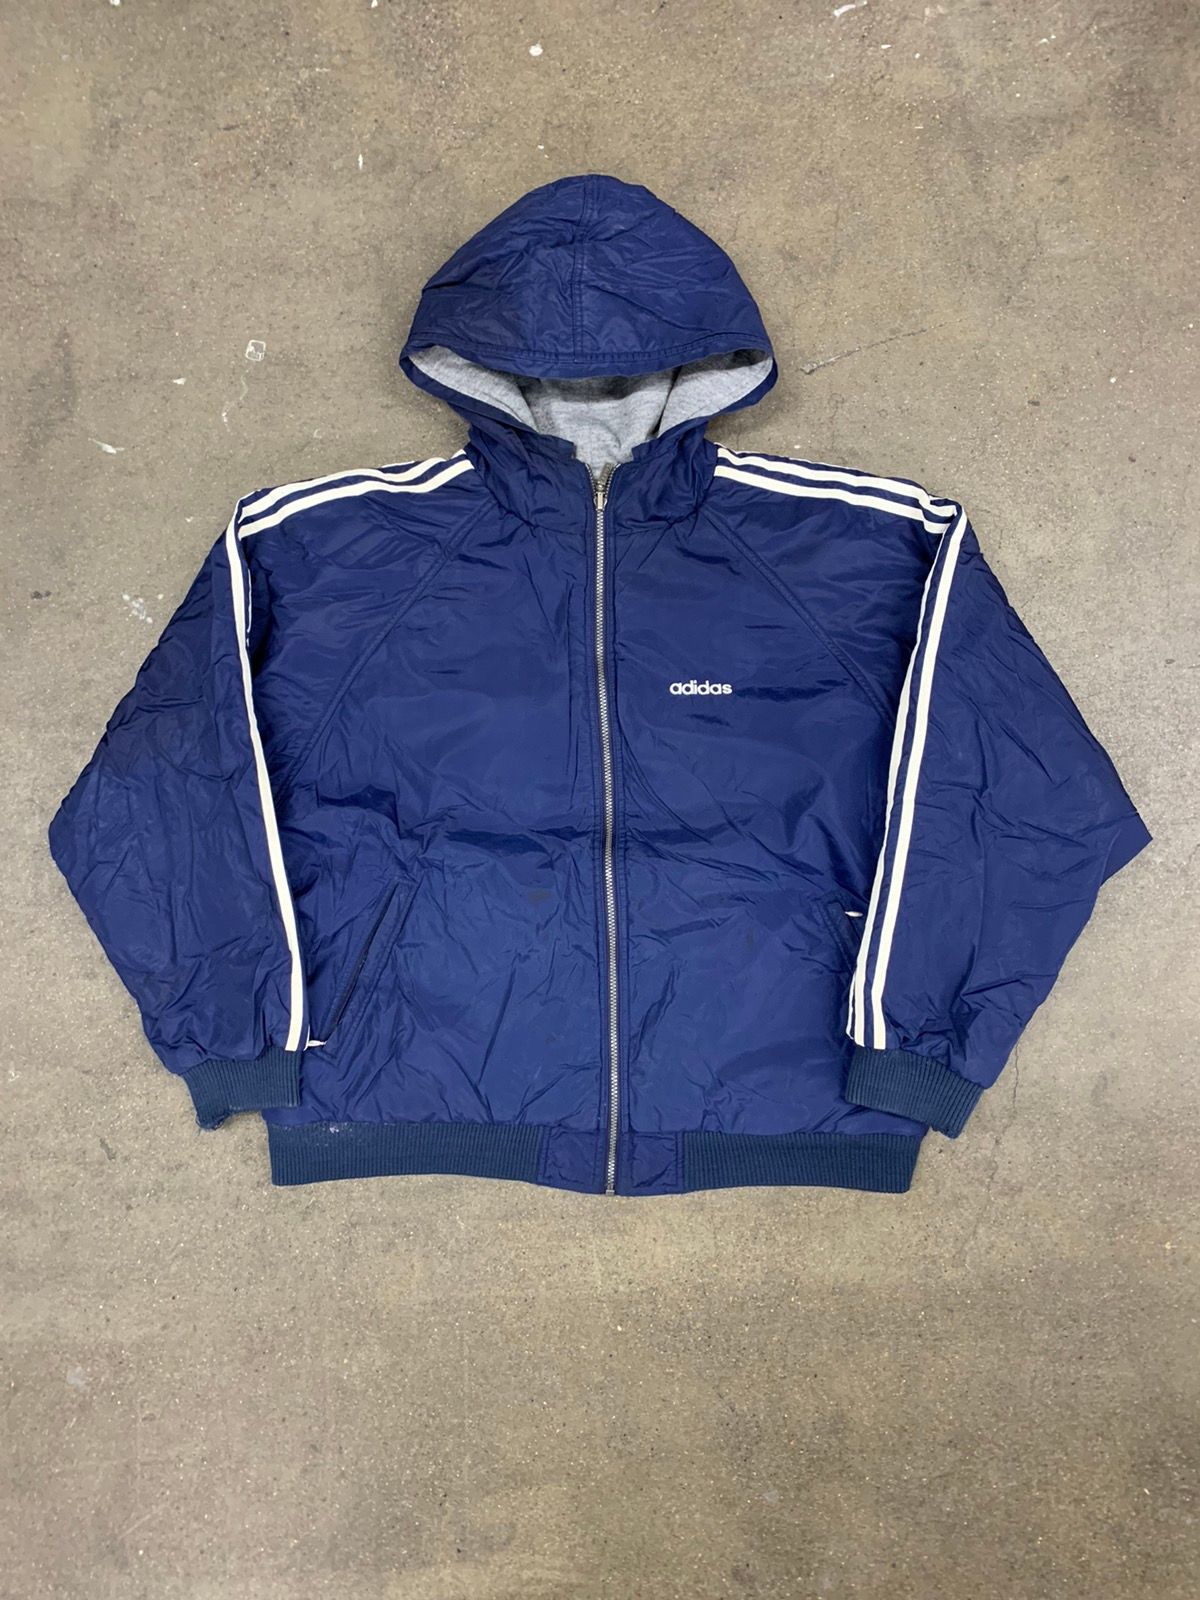 Adidas Vintage 1990s Adidas Navy Hooded Jacket Size US XL / EU 56 / 4 - 1 Preview